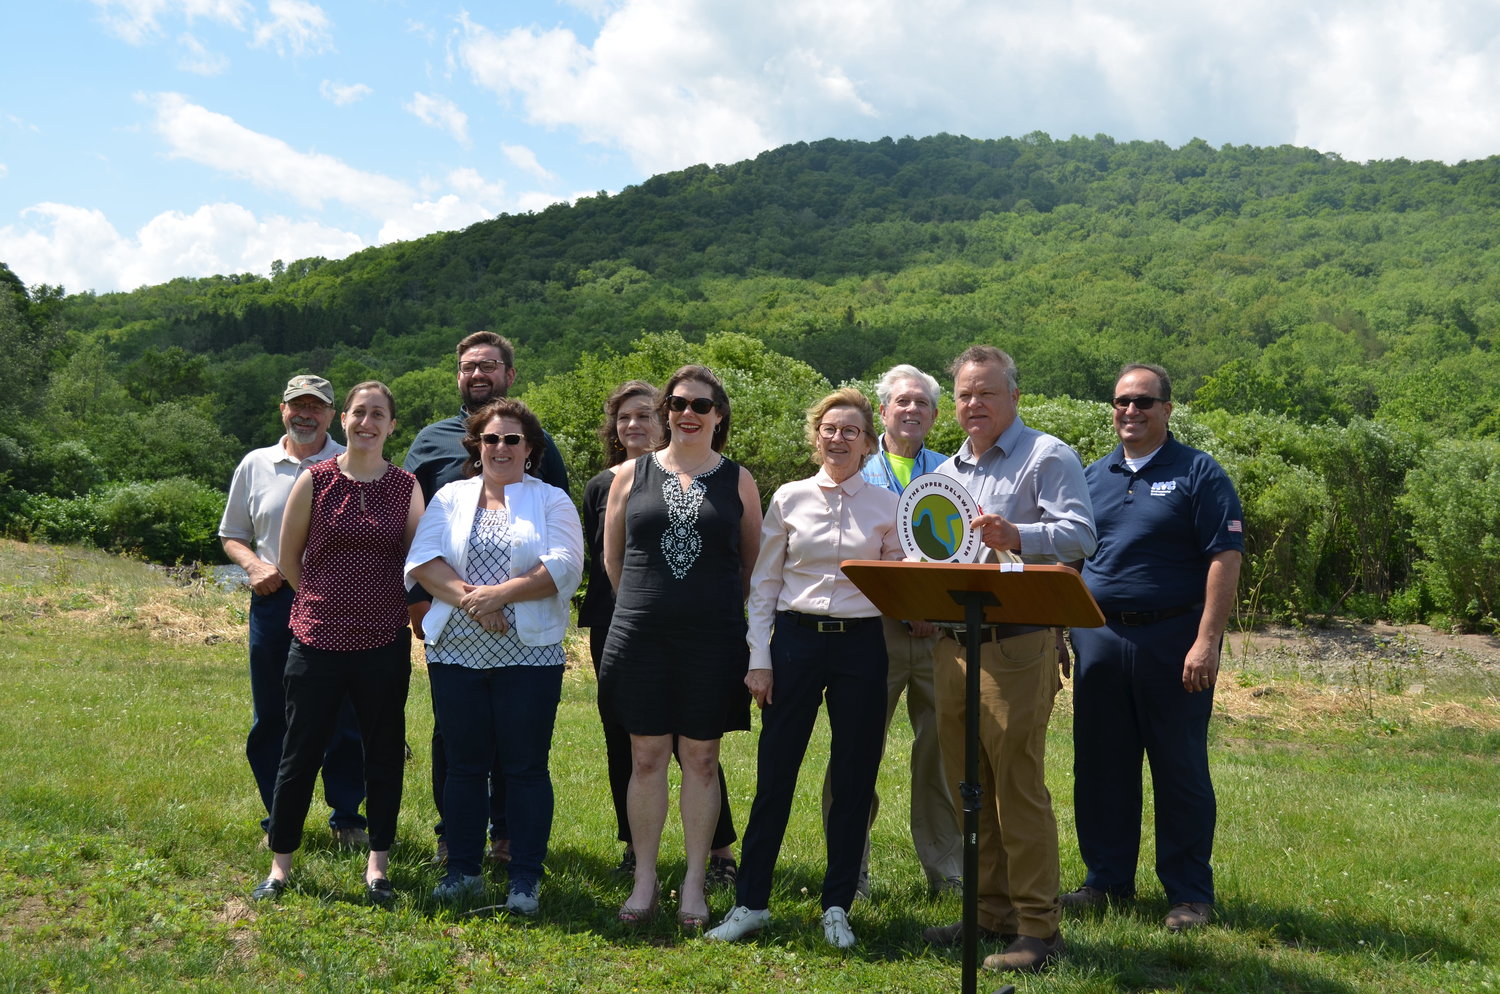 Assemblywoman Aileen Gunther joined the Friends of the Upper Delaware River, the U.S. Fish and Wildlife Service, the Upper Delaware Council, Senator Mike Martucci’s office and others.